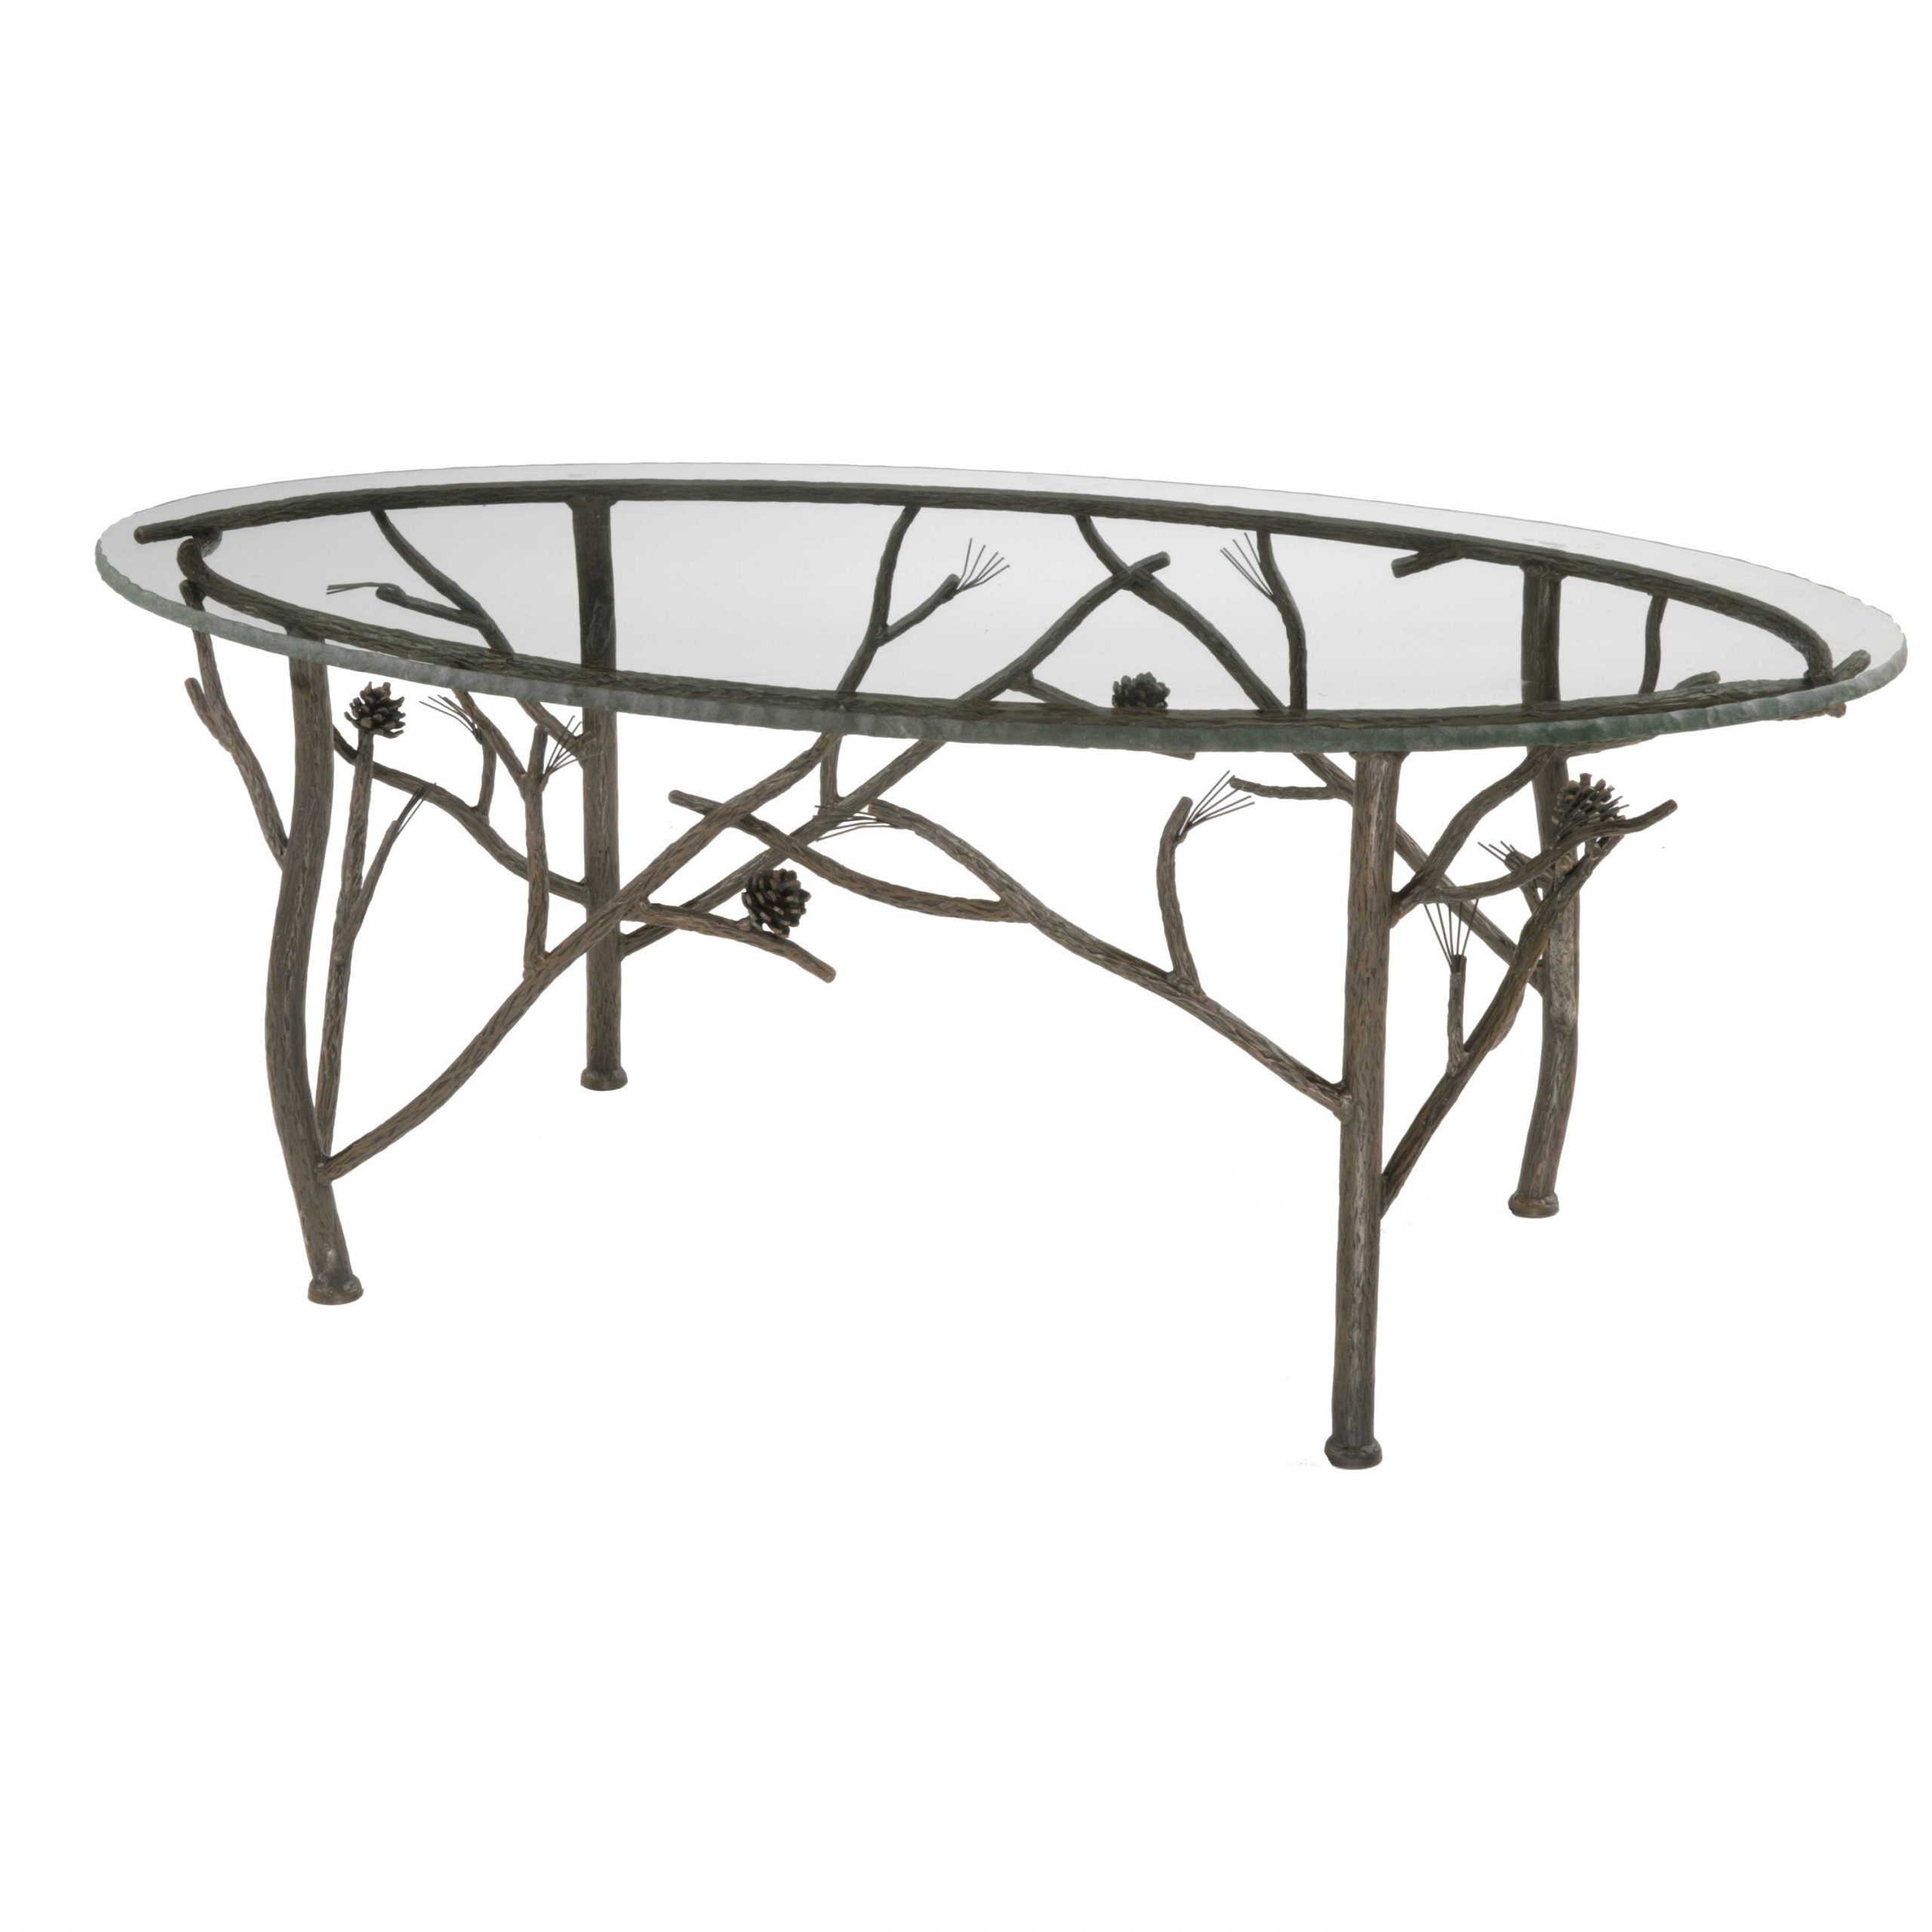 Rustic Pine Oval Coffee Table Within Most Popular Wrought Iron Cocktail Tables (Gallery 14 of 20)